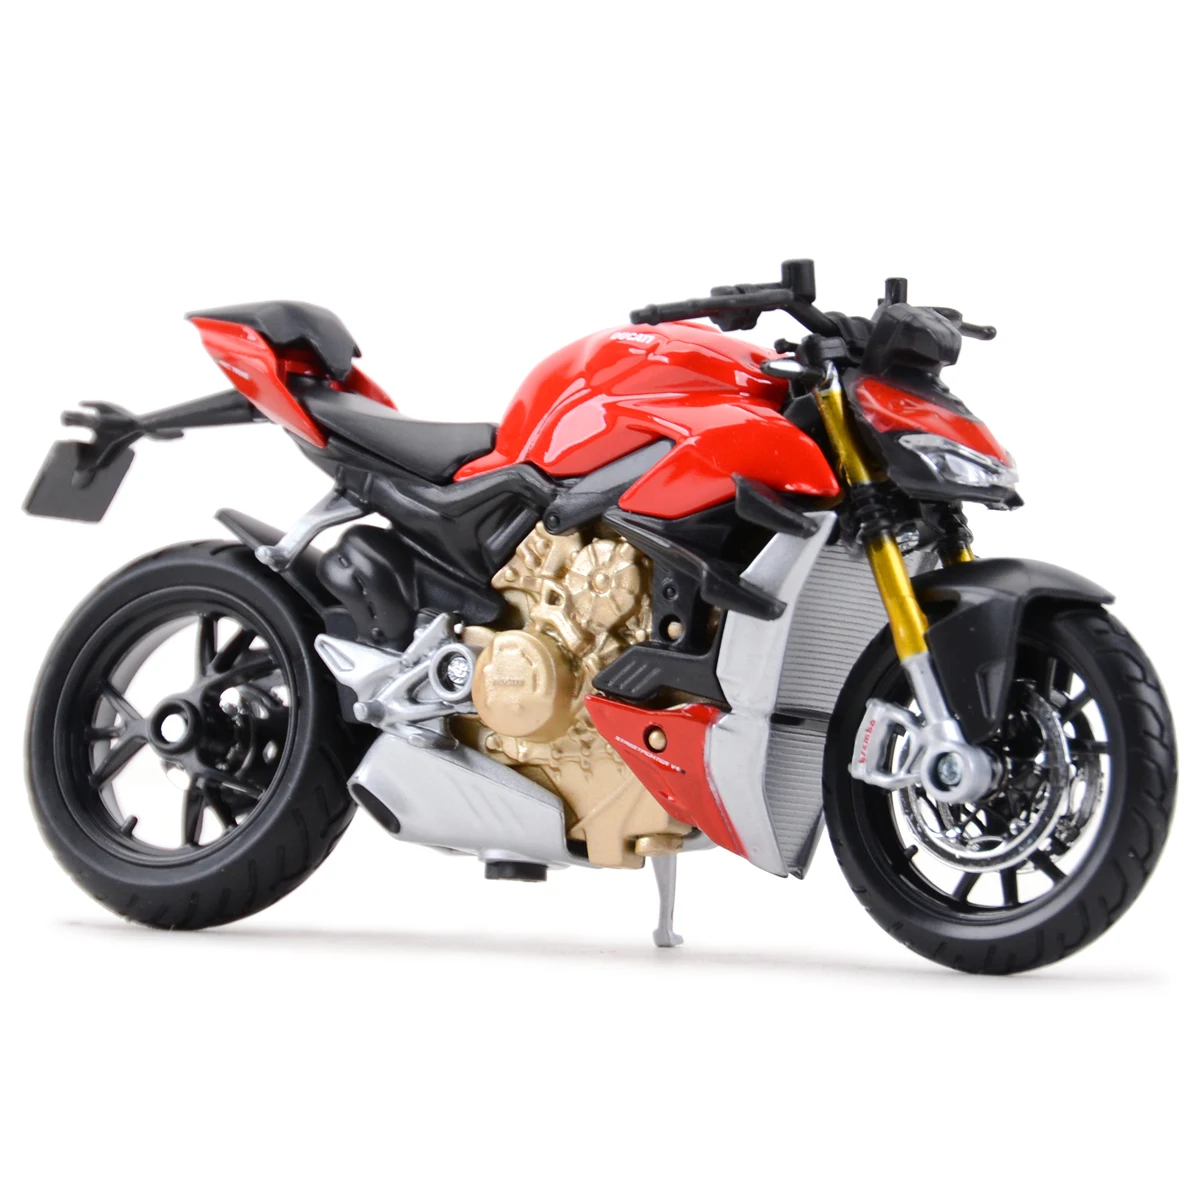 Maisto 1:18 Ducati Super Naked V4 S Static Die Cast Vehicles Collectible Hobbies Motorcycle Model Toys